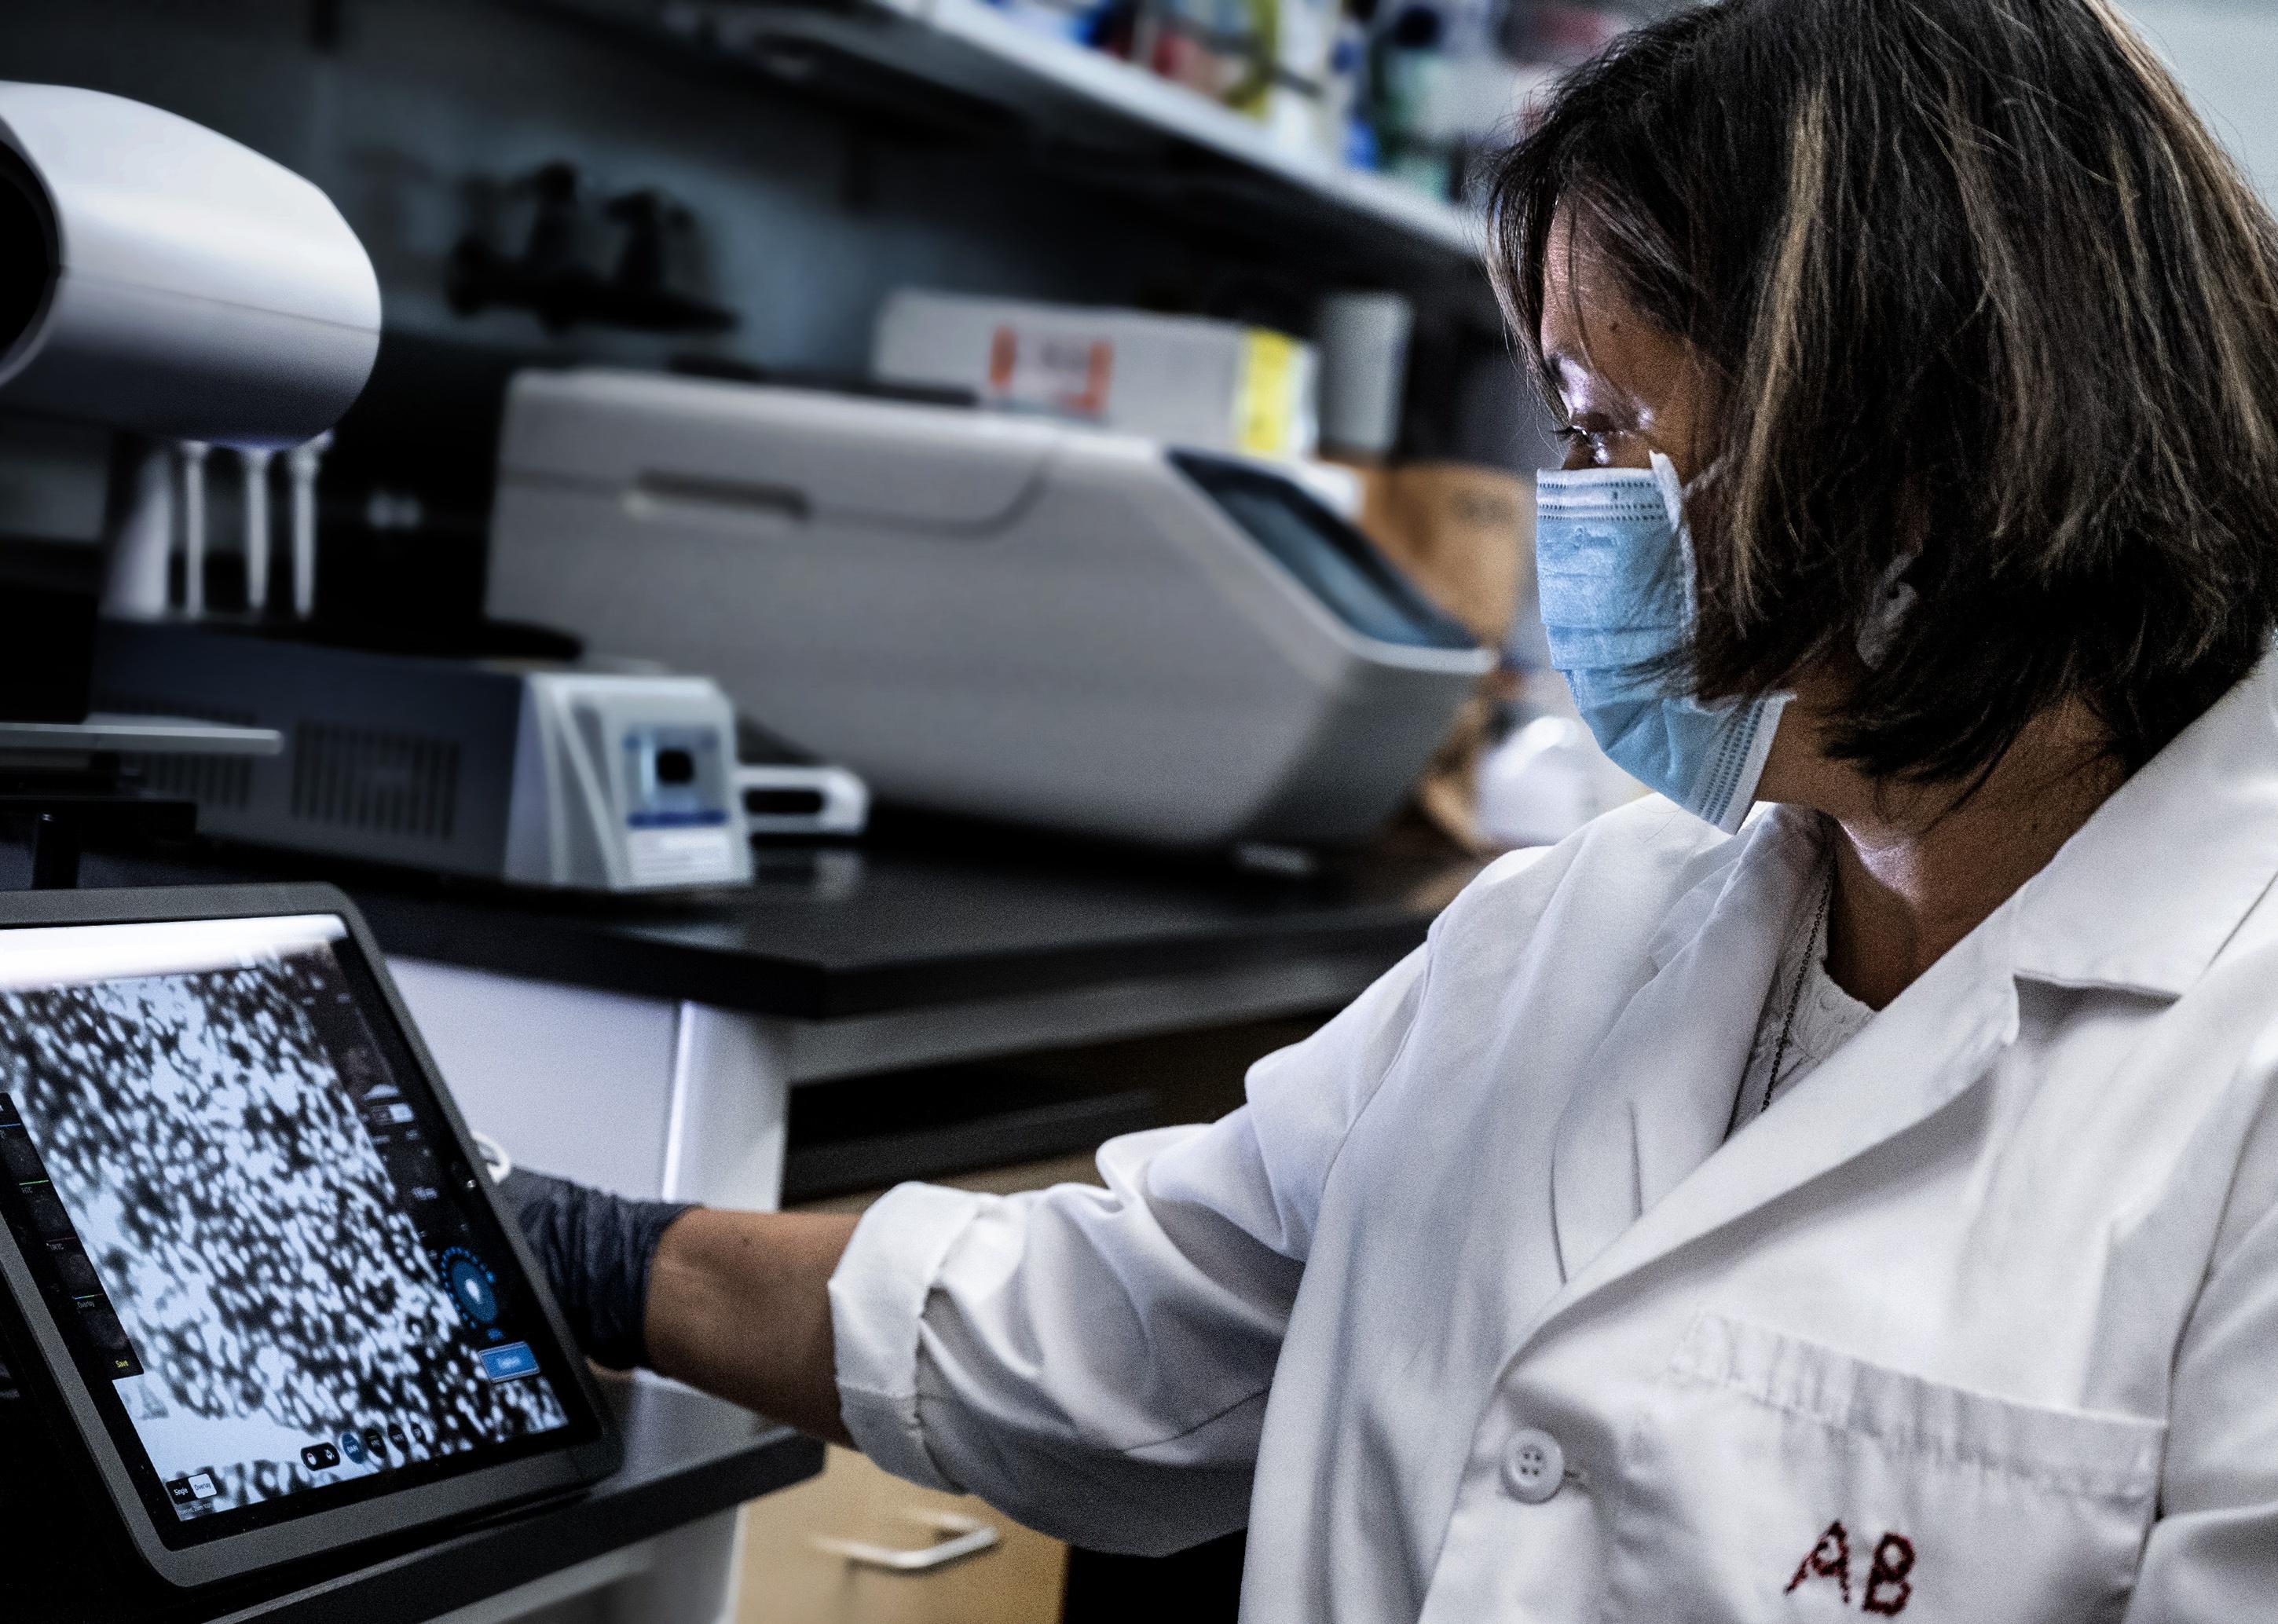 A female researcher analyzing stem cells on a screen.